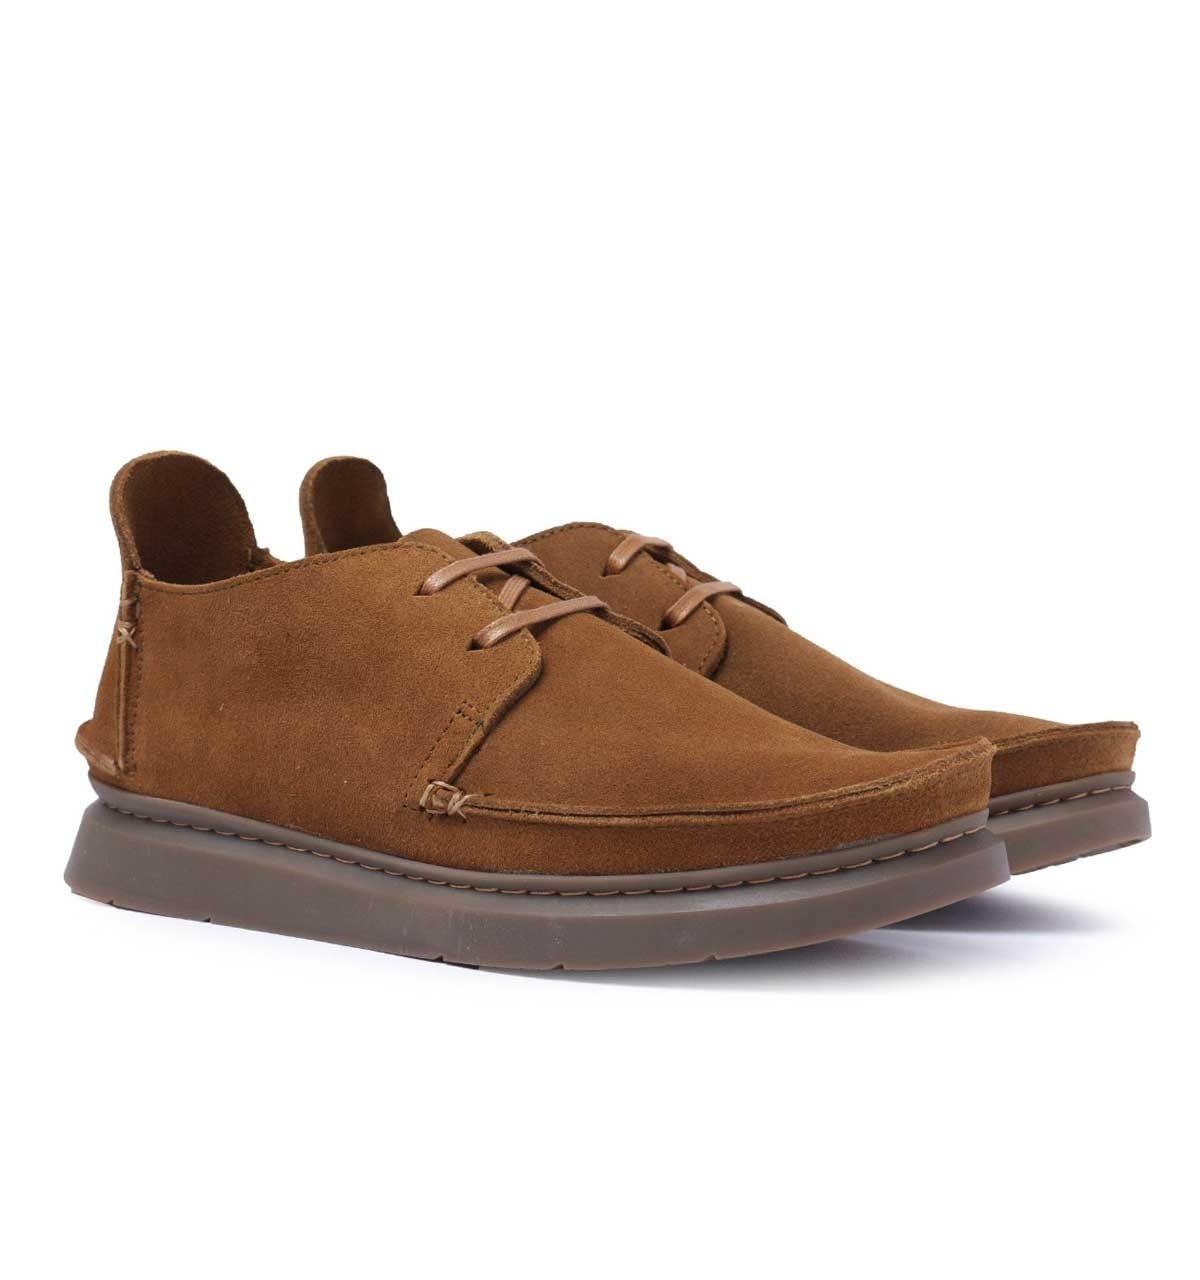 Clarks Seven Cola Suede Shoes in Brown for Men - Lyst